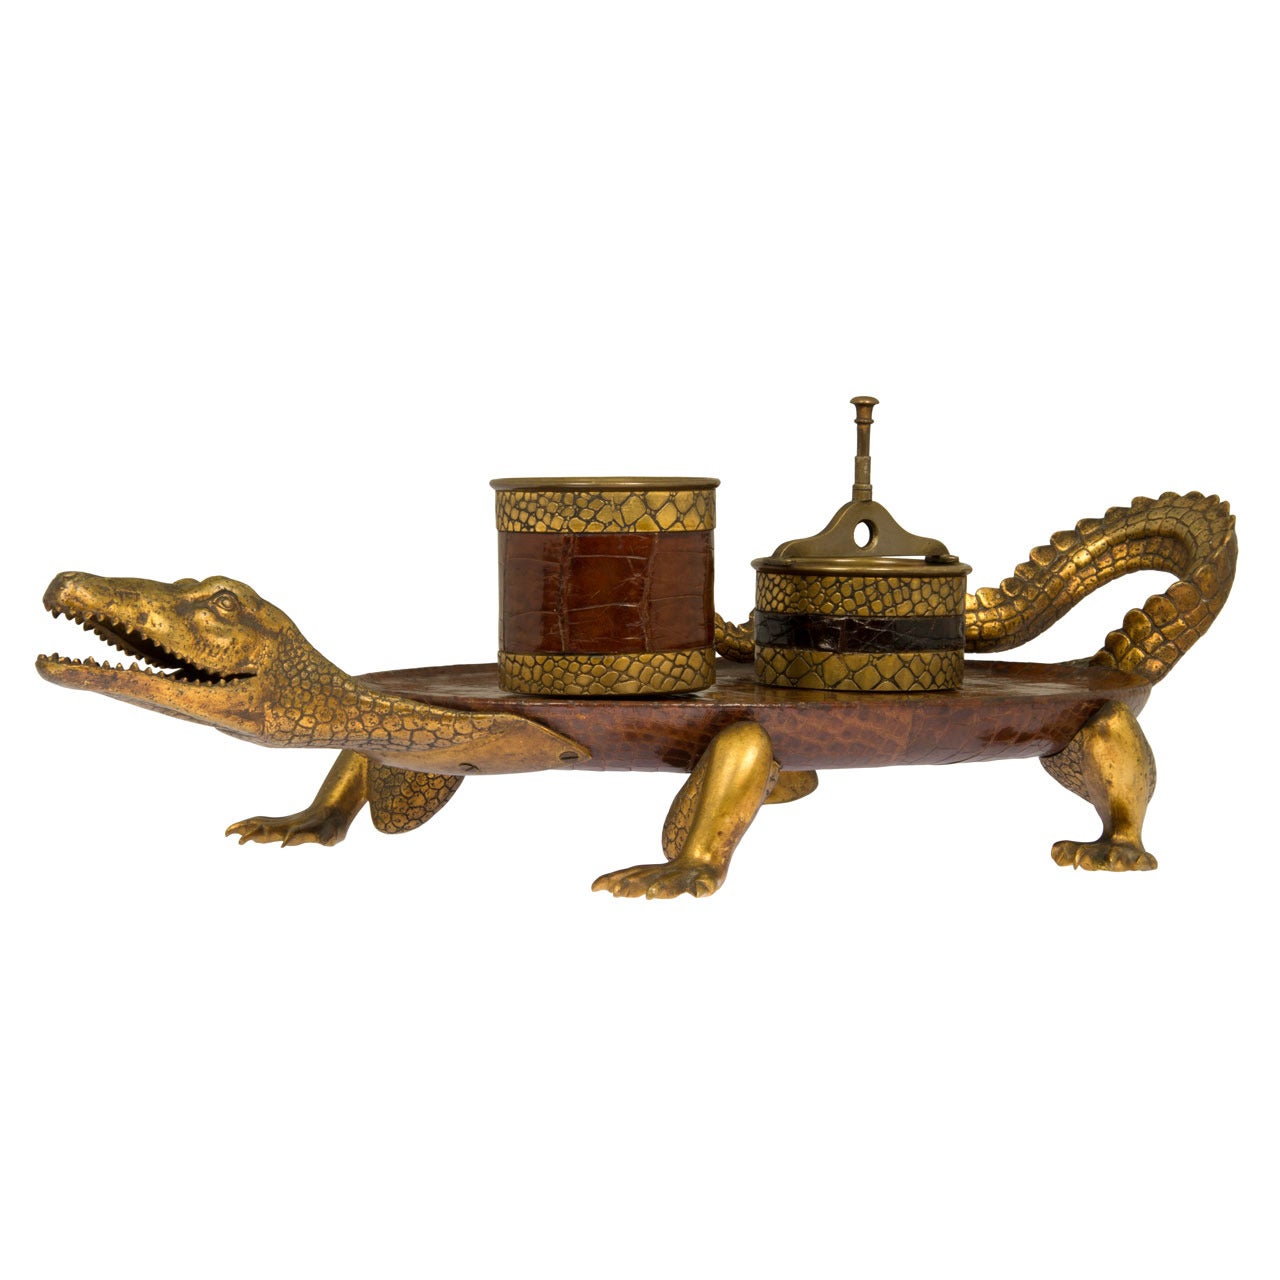 Bronze Figural Alligator Smoking Tray and Accessories